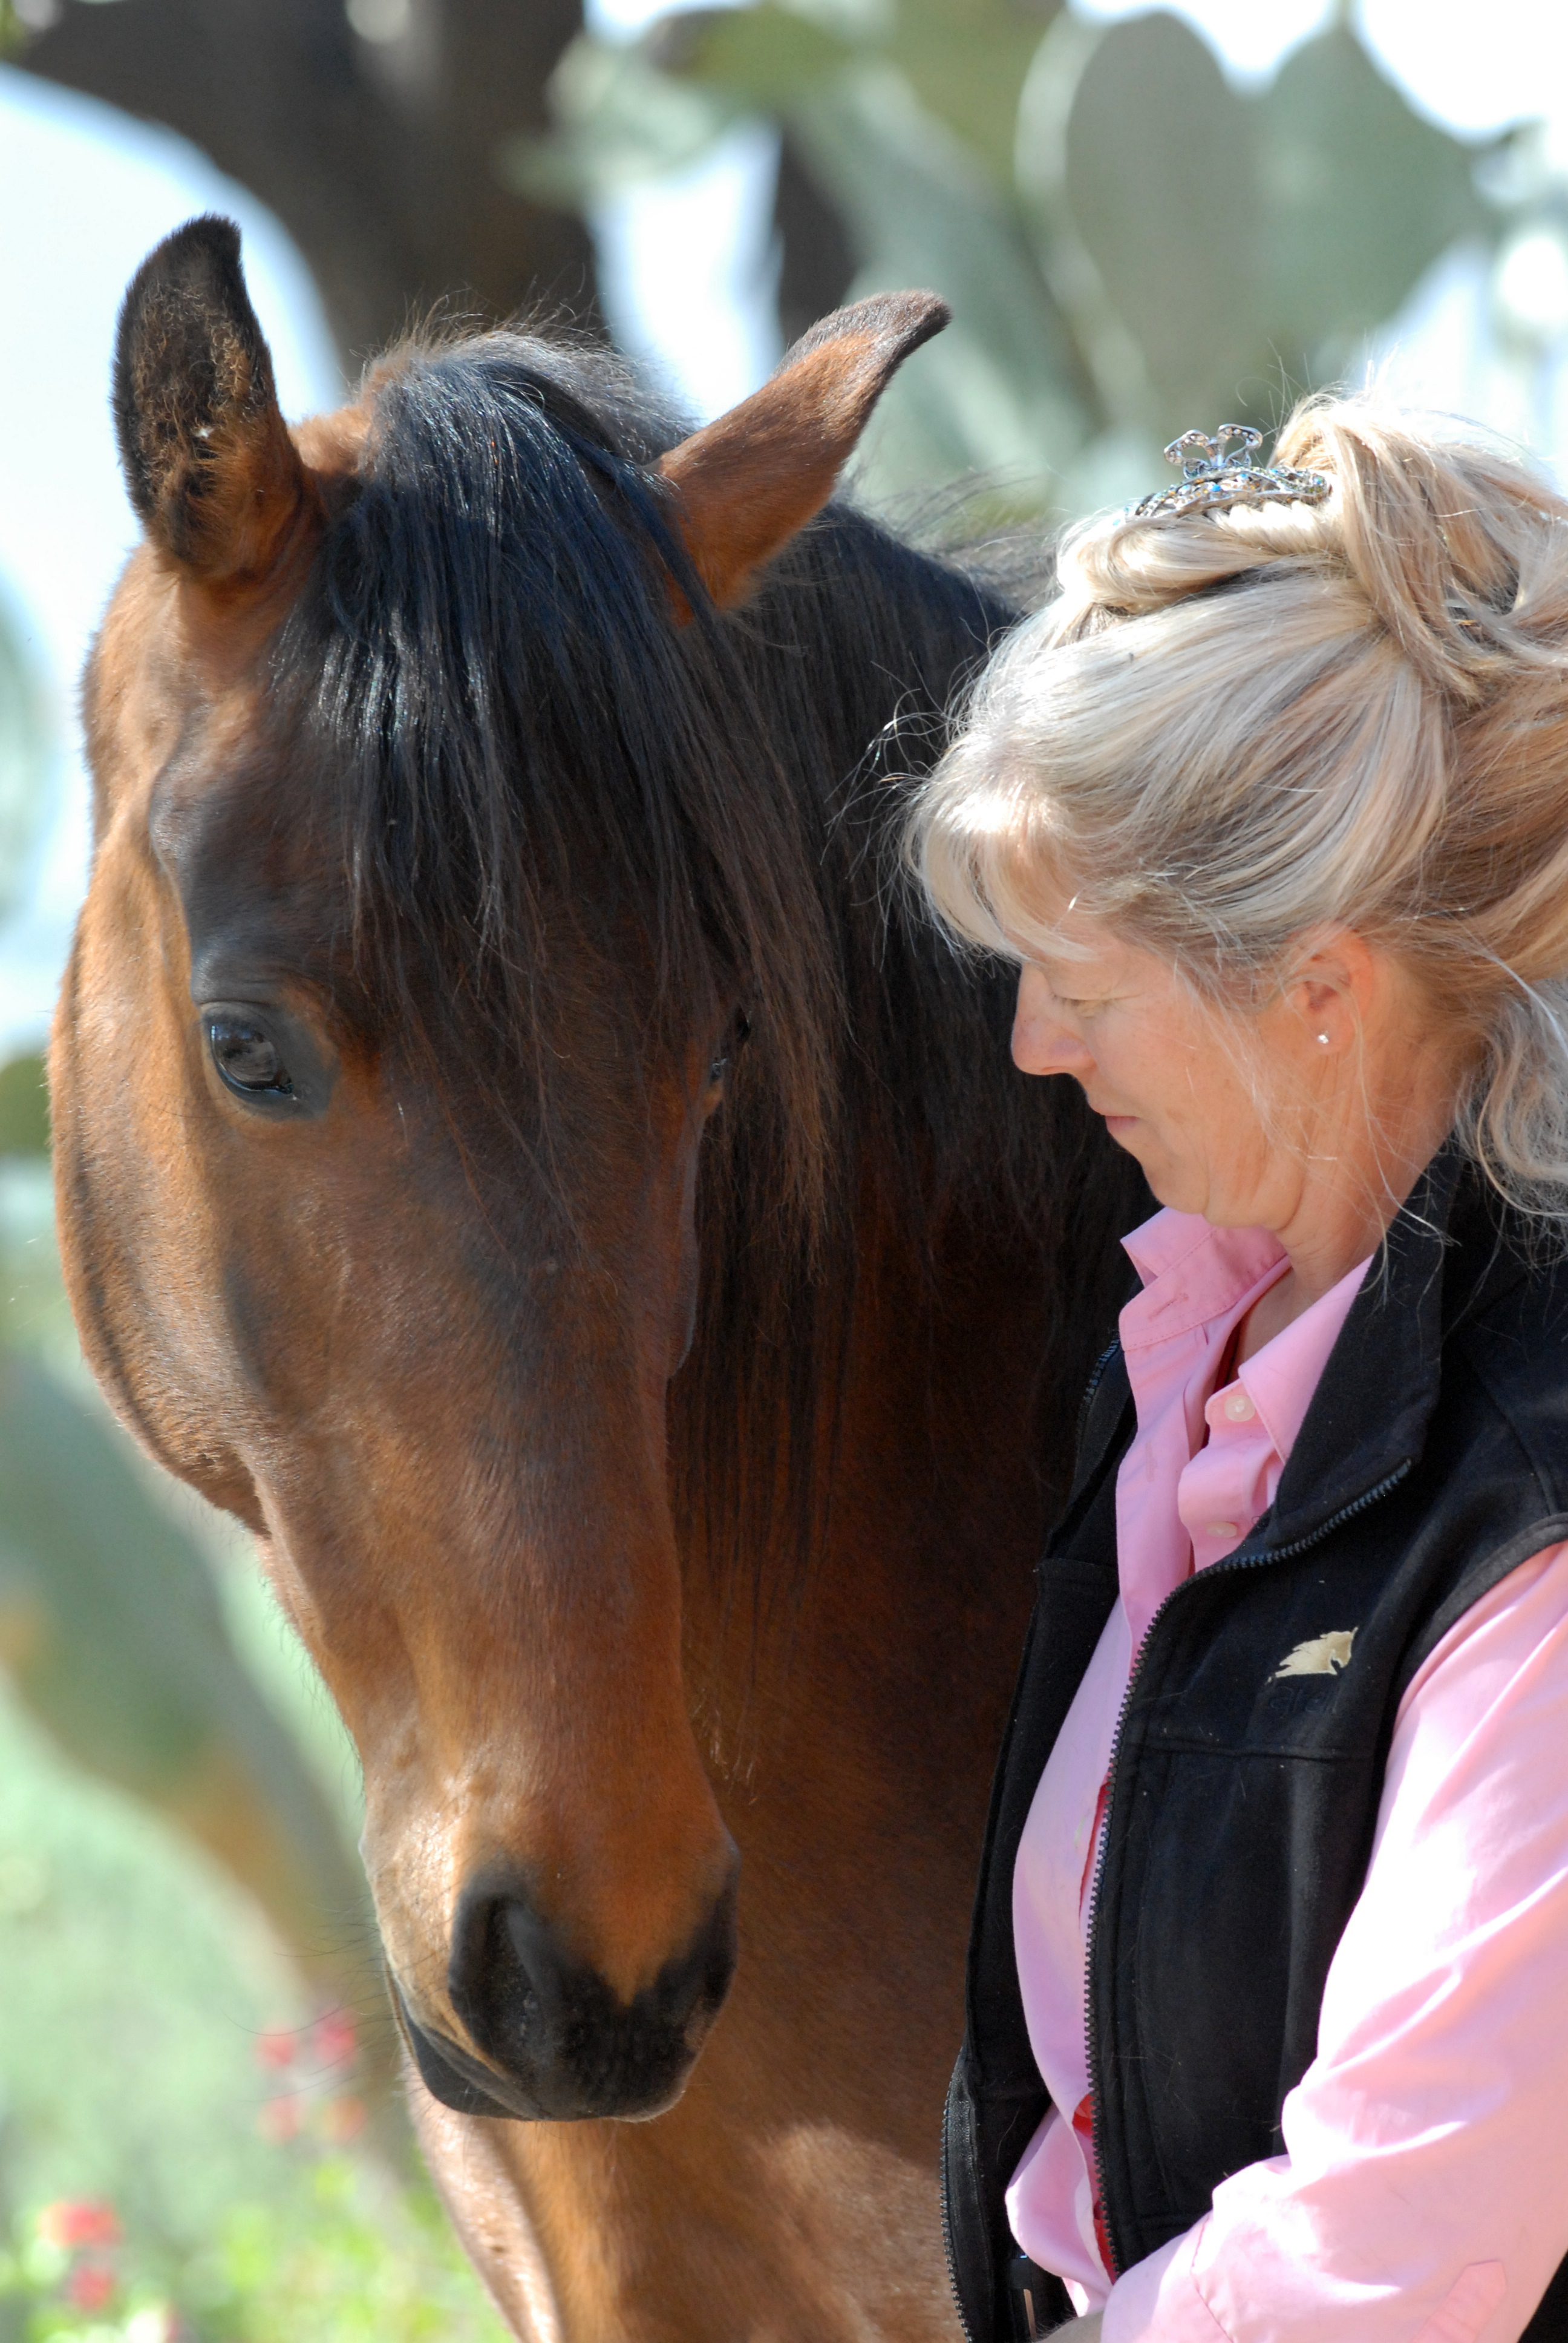 Build a better bond and relationship with your horse!